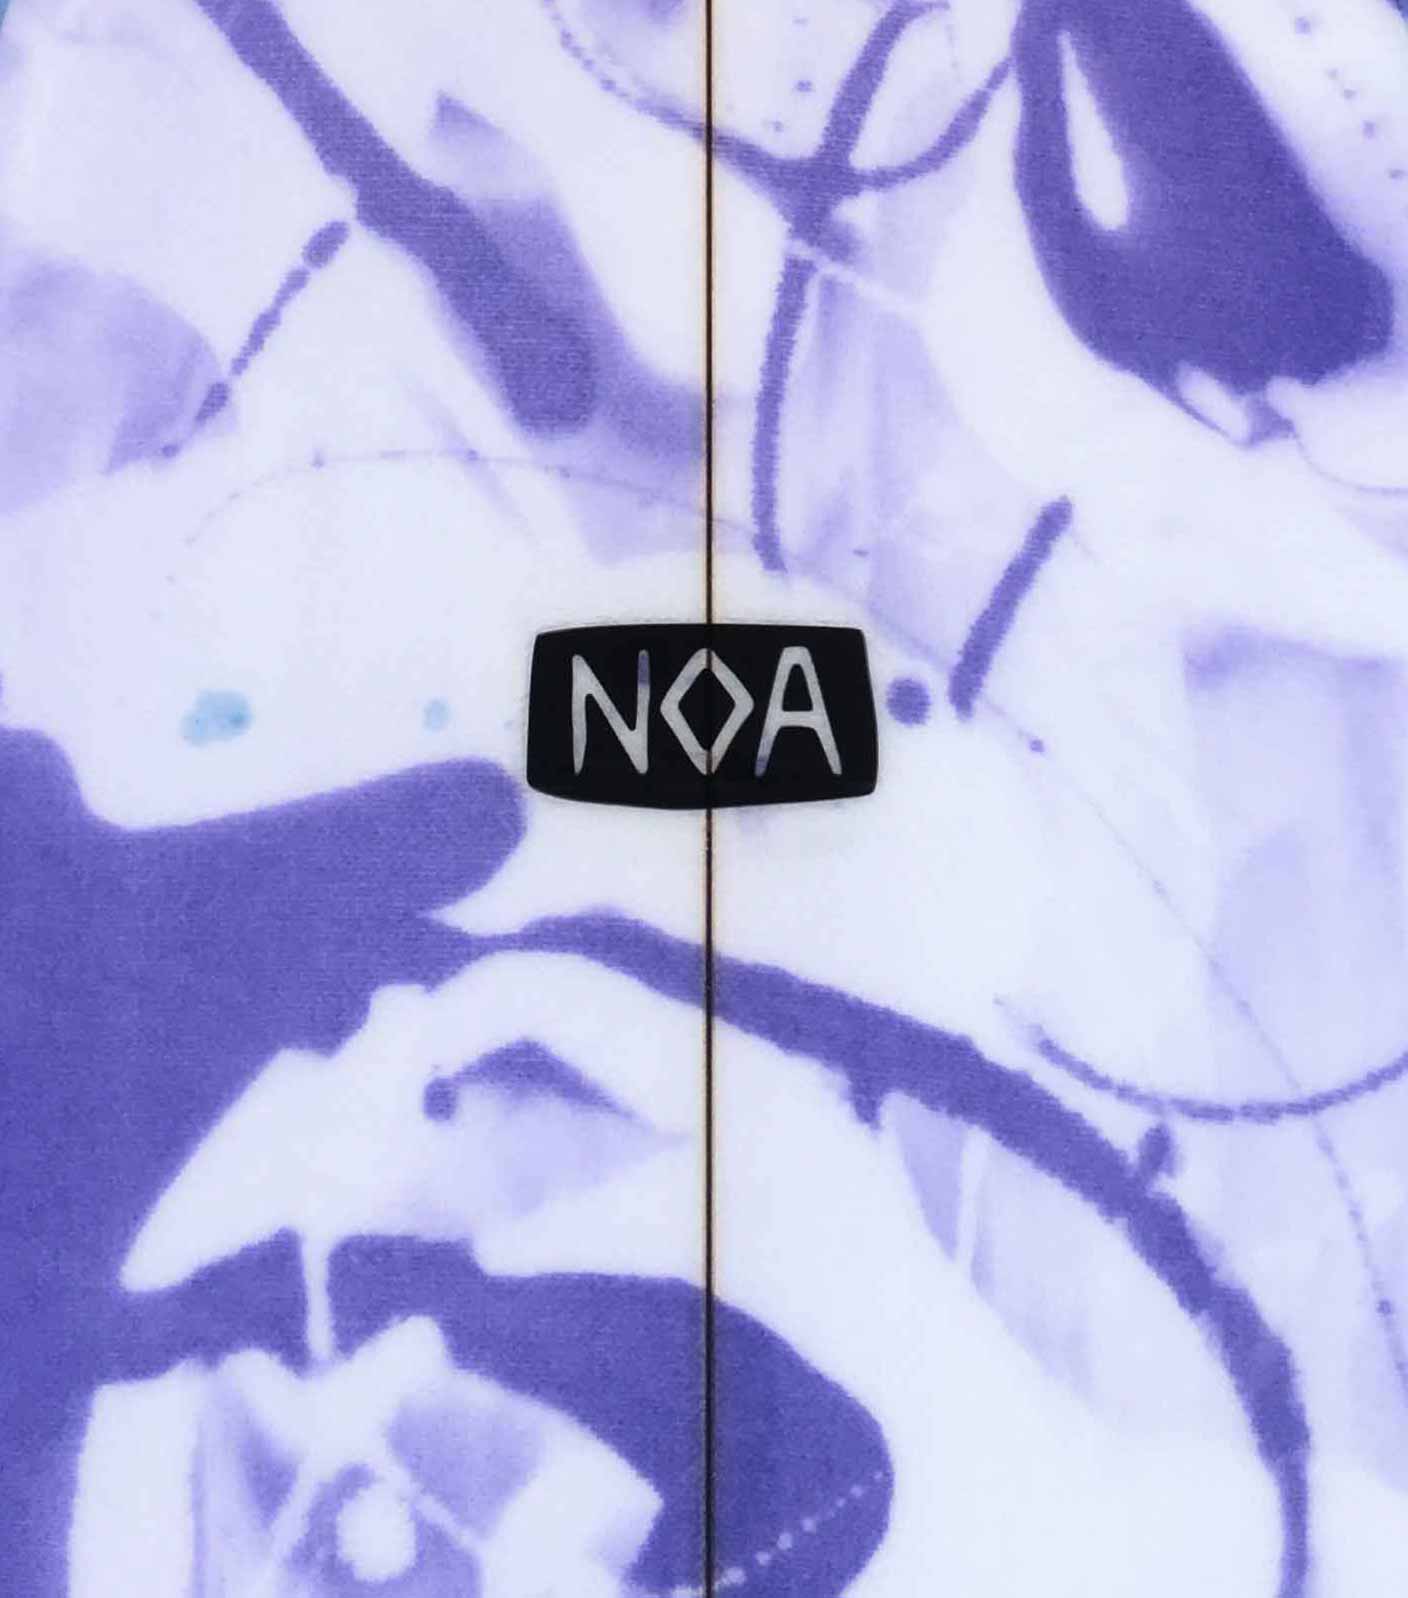 The NOA Surfboards logo on a white surfboards with purple and lavender graffiti-style color swirls.